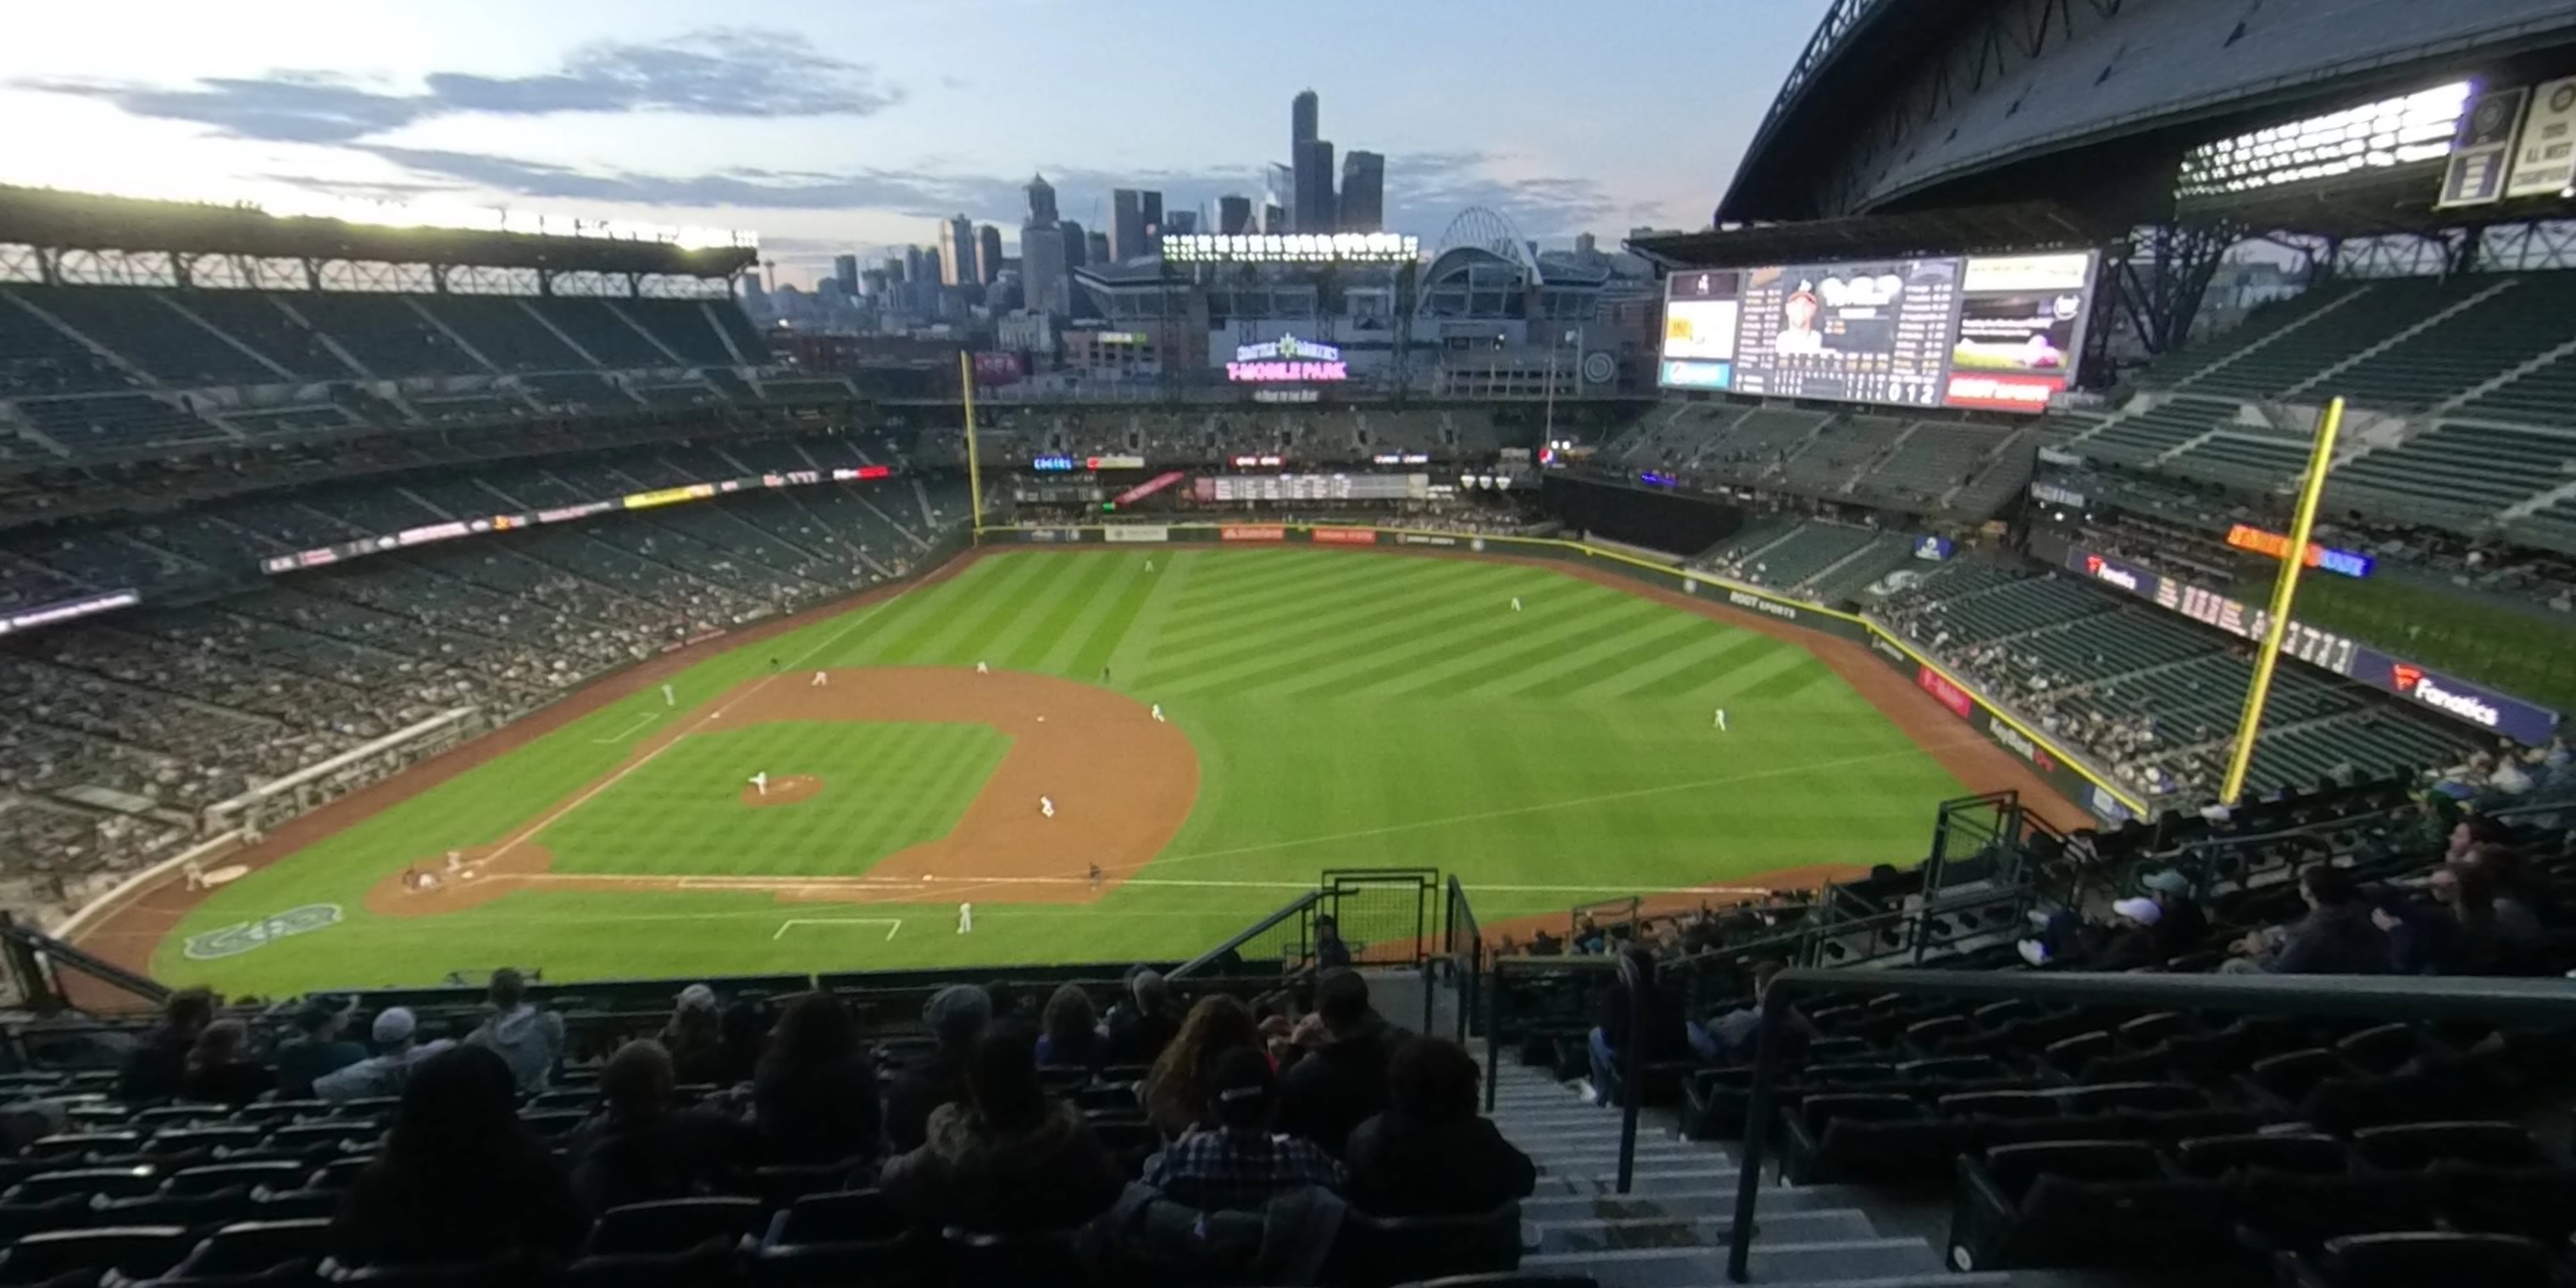 Section 320 at T-Mobile Park 